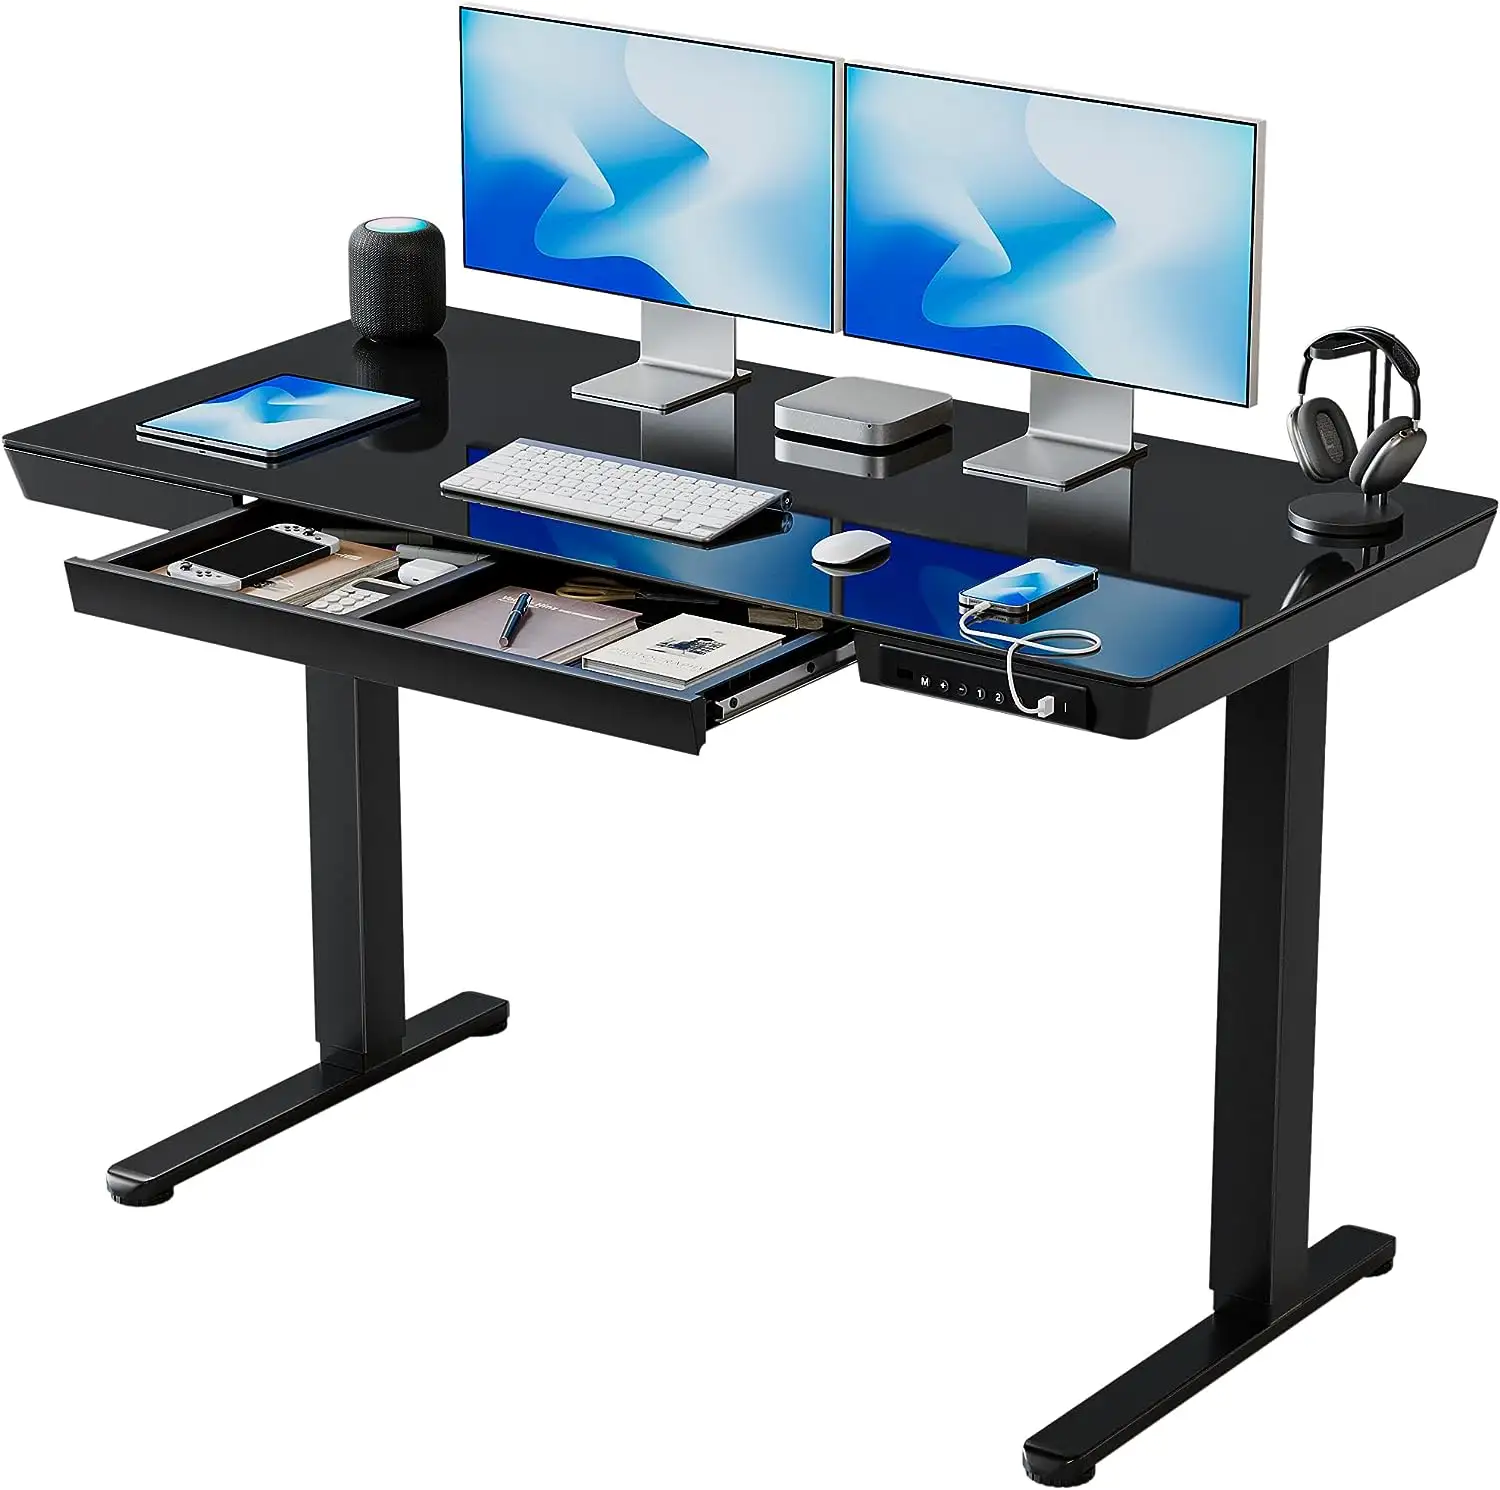 48 x 24 inch standing desk with drawers, sit-stand desk with pre-assembled top and USB charging port